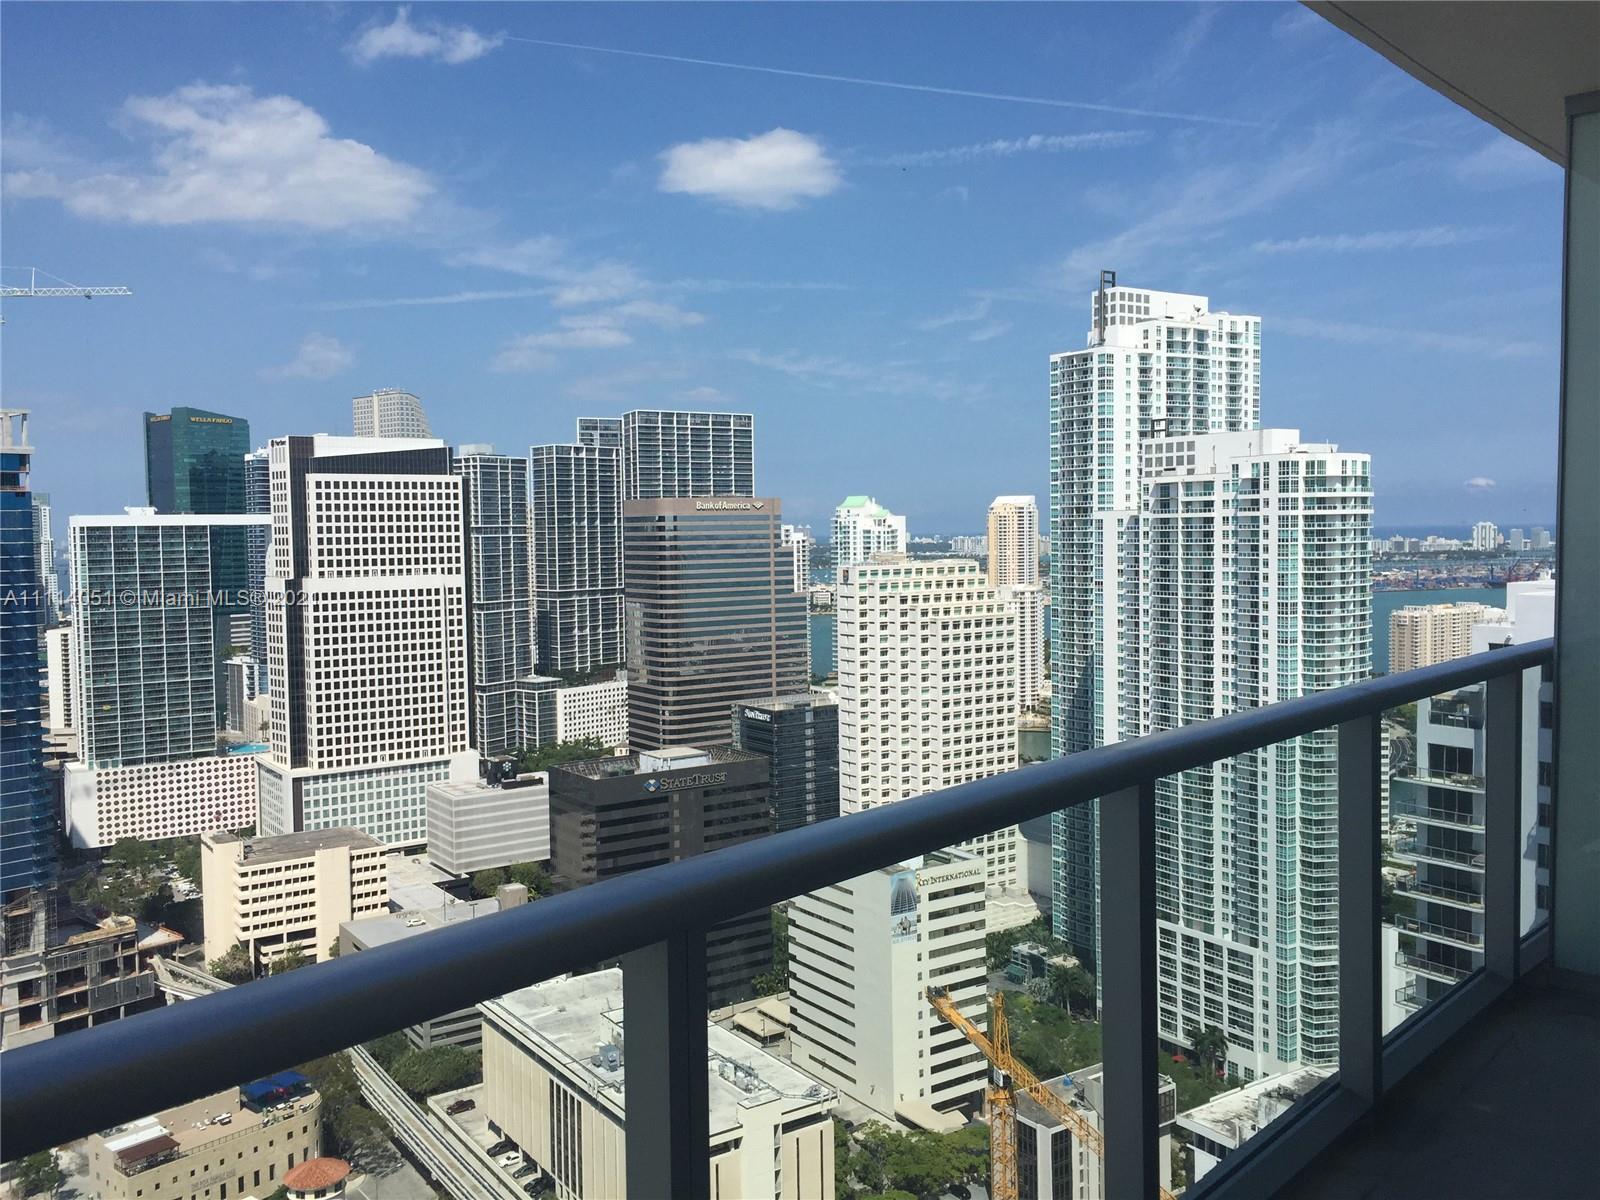 AMAZING 1 BEDROMM/1 BATH APARTMENT LOCATED IN THE HEART OF BRICKELL, CLOSE TO UPSCALE RESTAURANTS, SHOPPING AND MORE. BEAUTIFUL VIEW FROM BALCONY, STAINLESS STEEL APPLIANCES, HIGH GLOSS CABINETS, STYLISH BATHROOM, WASHER AND DRYER INSIDE, GREAT BULDING AMENITIES, VALET, SECURITY, ROOFTOP DECK/POOL, FIRNESS CENTER, MOVIE THEATHER, CHILDREN PLAYROOM, ETC. 1 PARKING SPACE